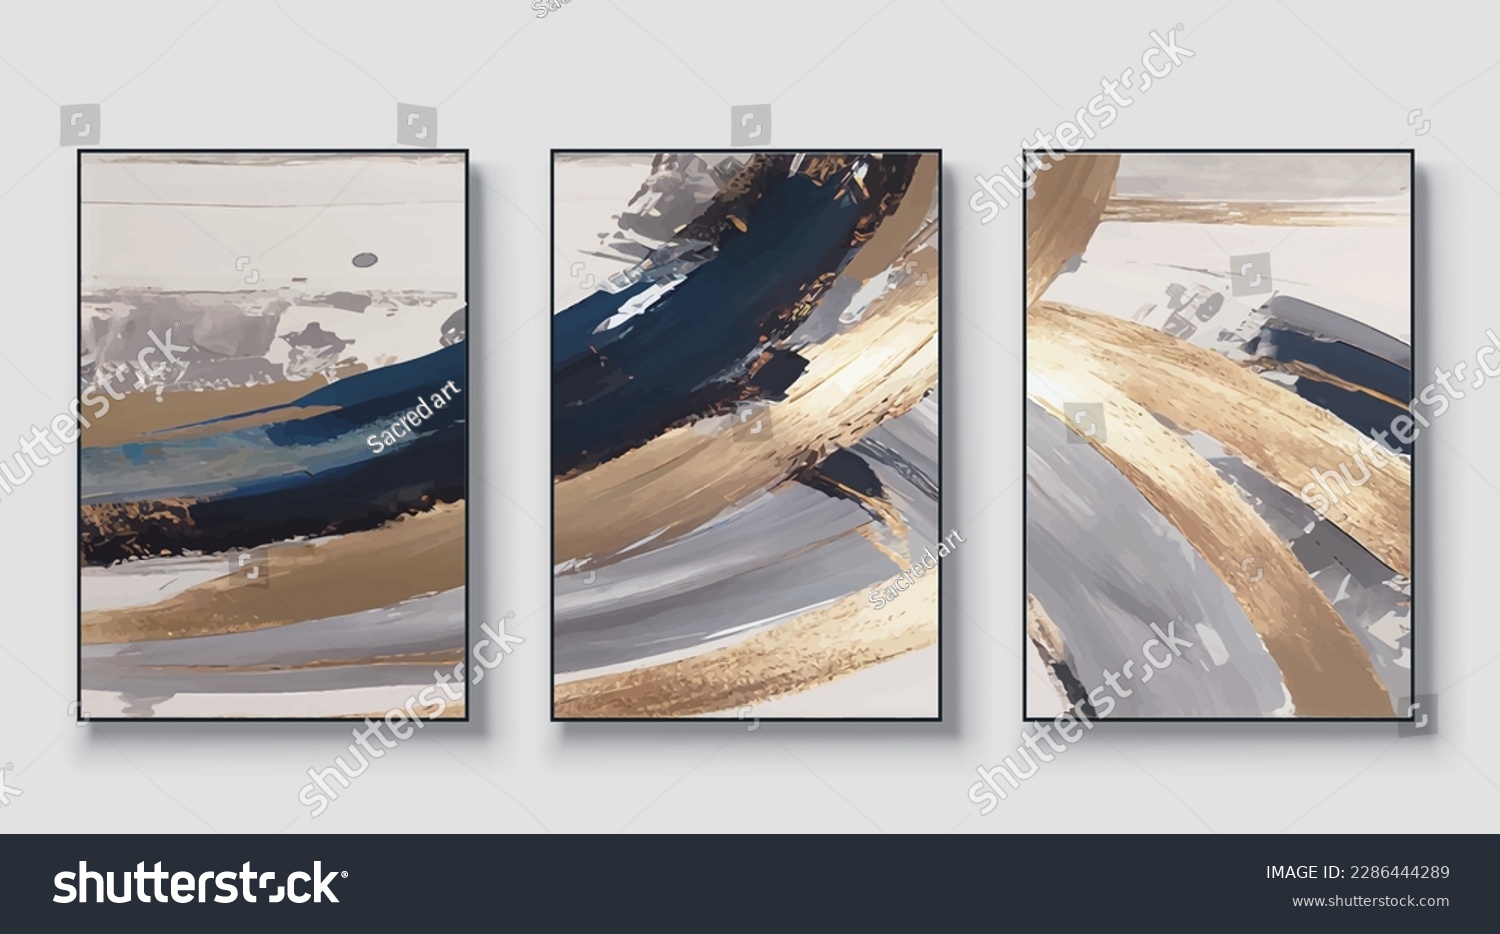 Abstract art vector illustration. Set of three artworks, background vector. Natural fine art wall art for home decor and printing. #2286444289